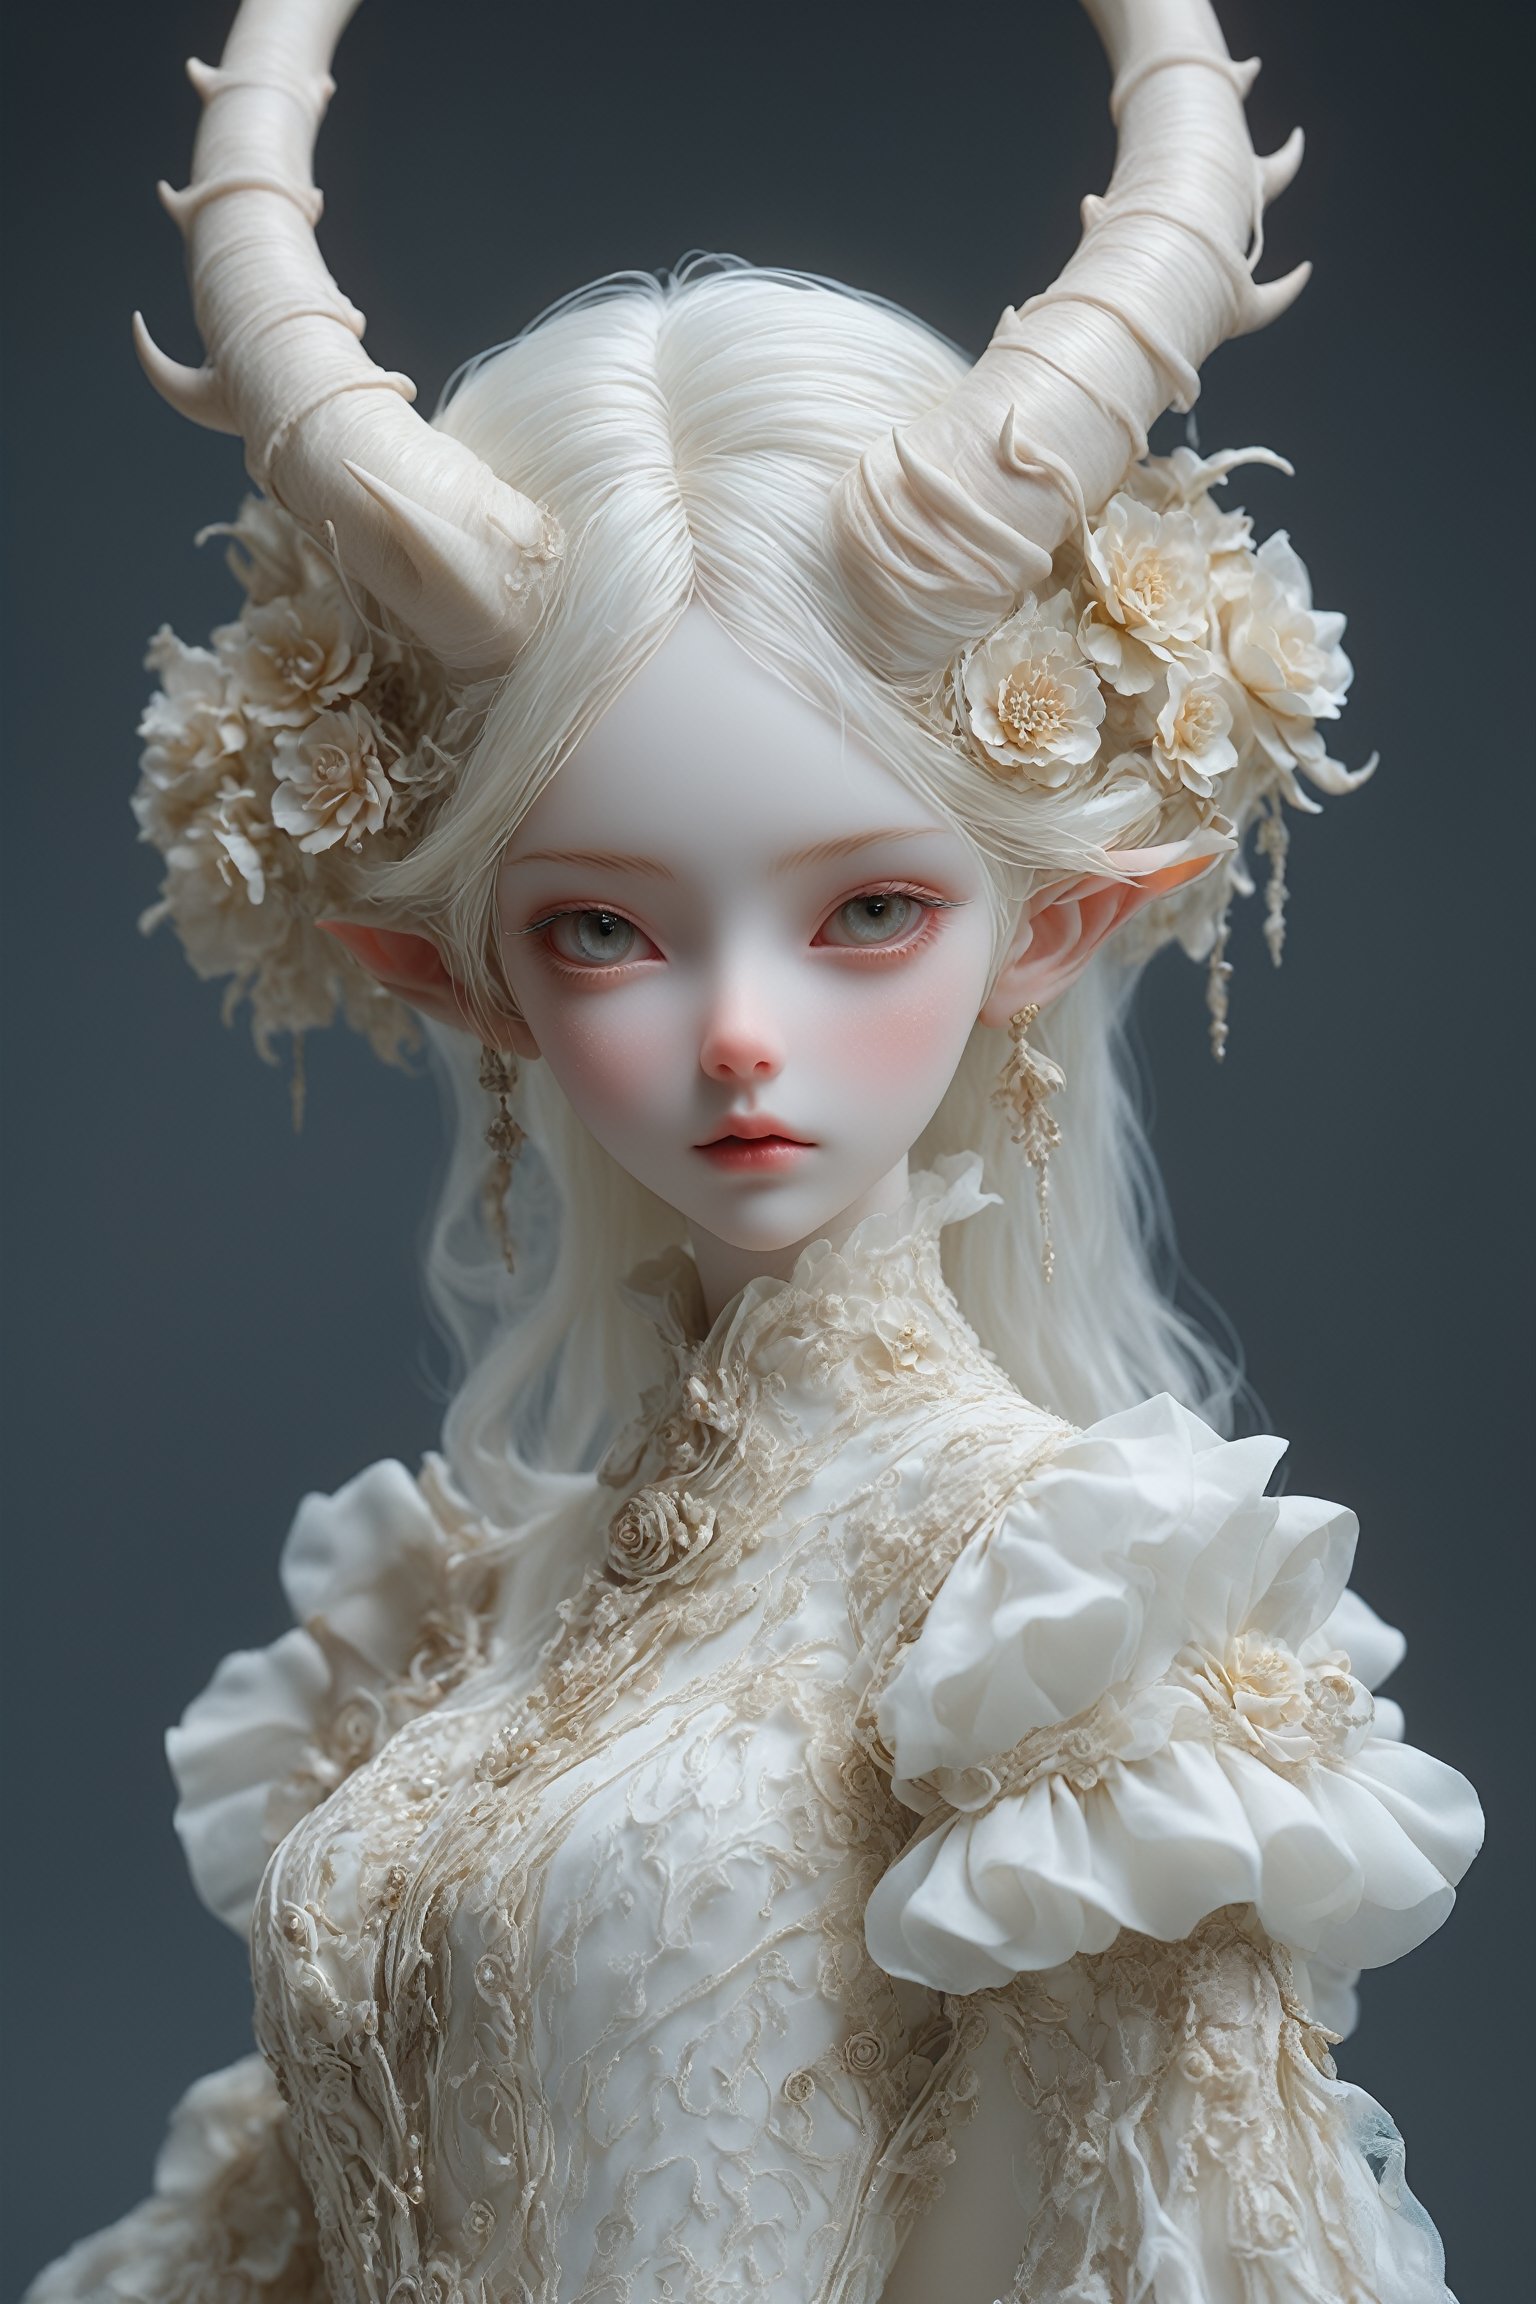 a ball-jointed doll albino demon girl,(Long deer horn: 1.2),
dressed in a cyberpunk-inspired Rococo sexy dress,The doll features intricate joints, allowing for lifelike poses. Her dress merges the ornate elegance of Rococo with futuristic cyber elements. The fabric is a mix of rich silks and metallic materials, adorned with elaborate lace and digital patterns that glow subtly. The bodice is detailed with delicate ruffles and cybernetic embellishments, while the skirt flares out in layers, combining traditional Rococo volume with sleek, modern lines. Her hair is styled in a powdered wig, interwoven with fiber optic strands, ,PIXAR,Ice Dress,LuxuriousWheelsCostume